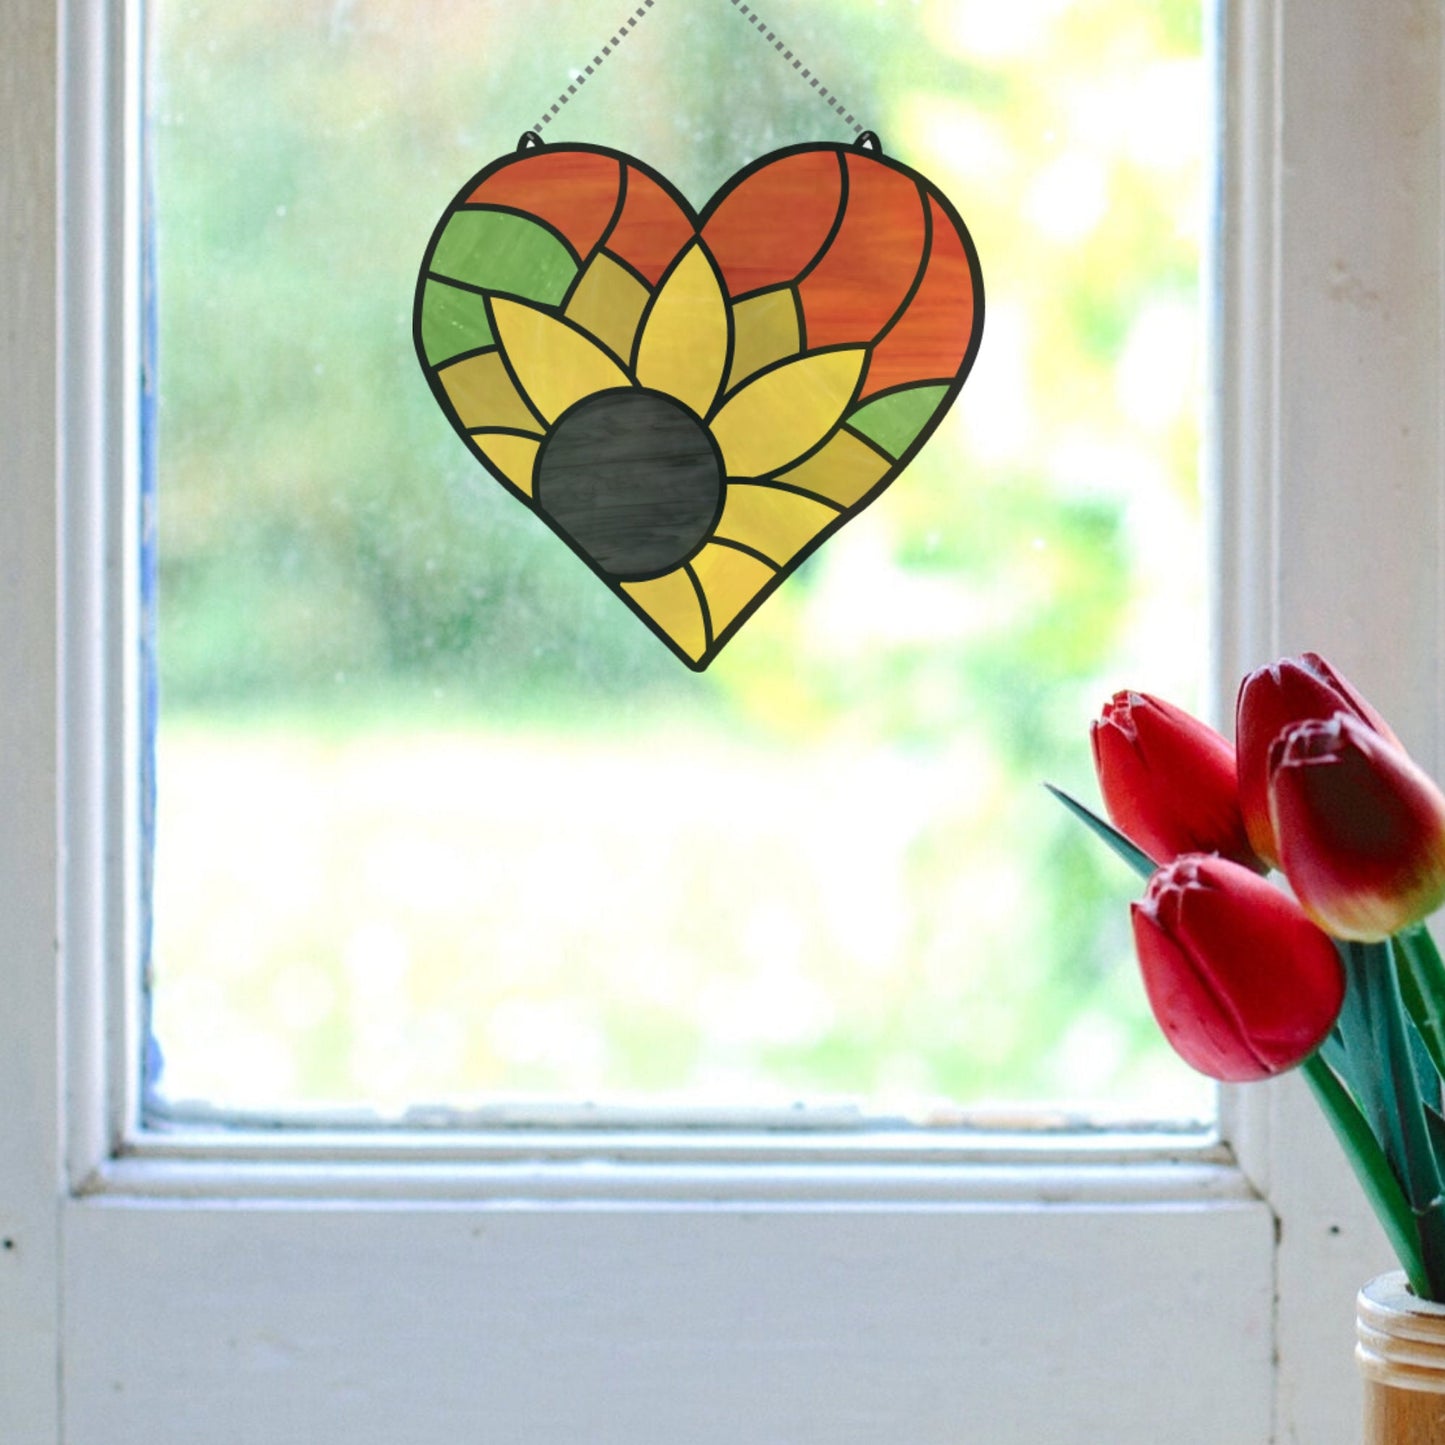 Stained Glass Heart Suncatcher Pattern With Sunflower